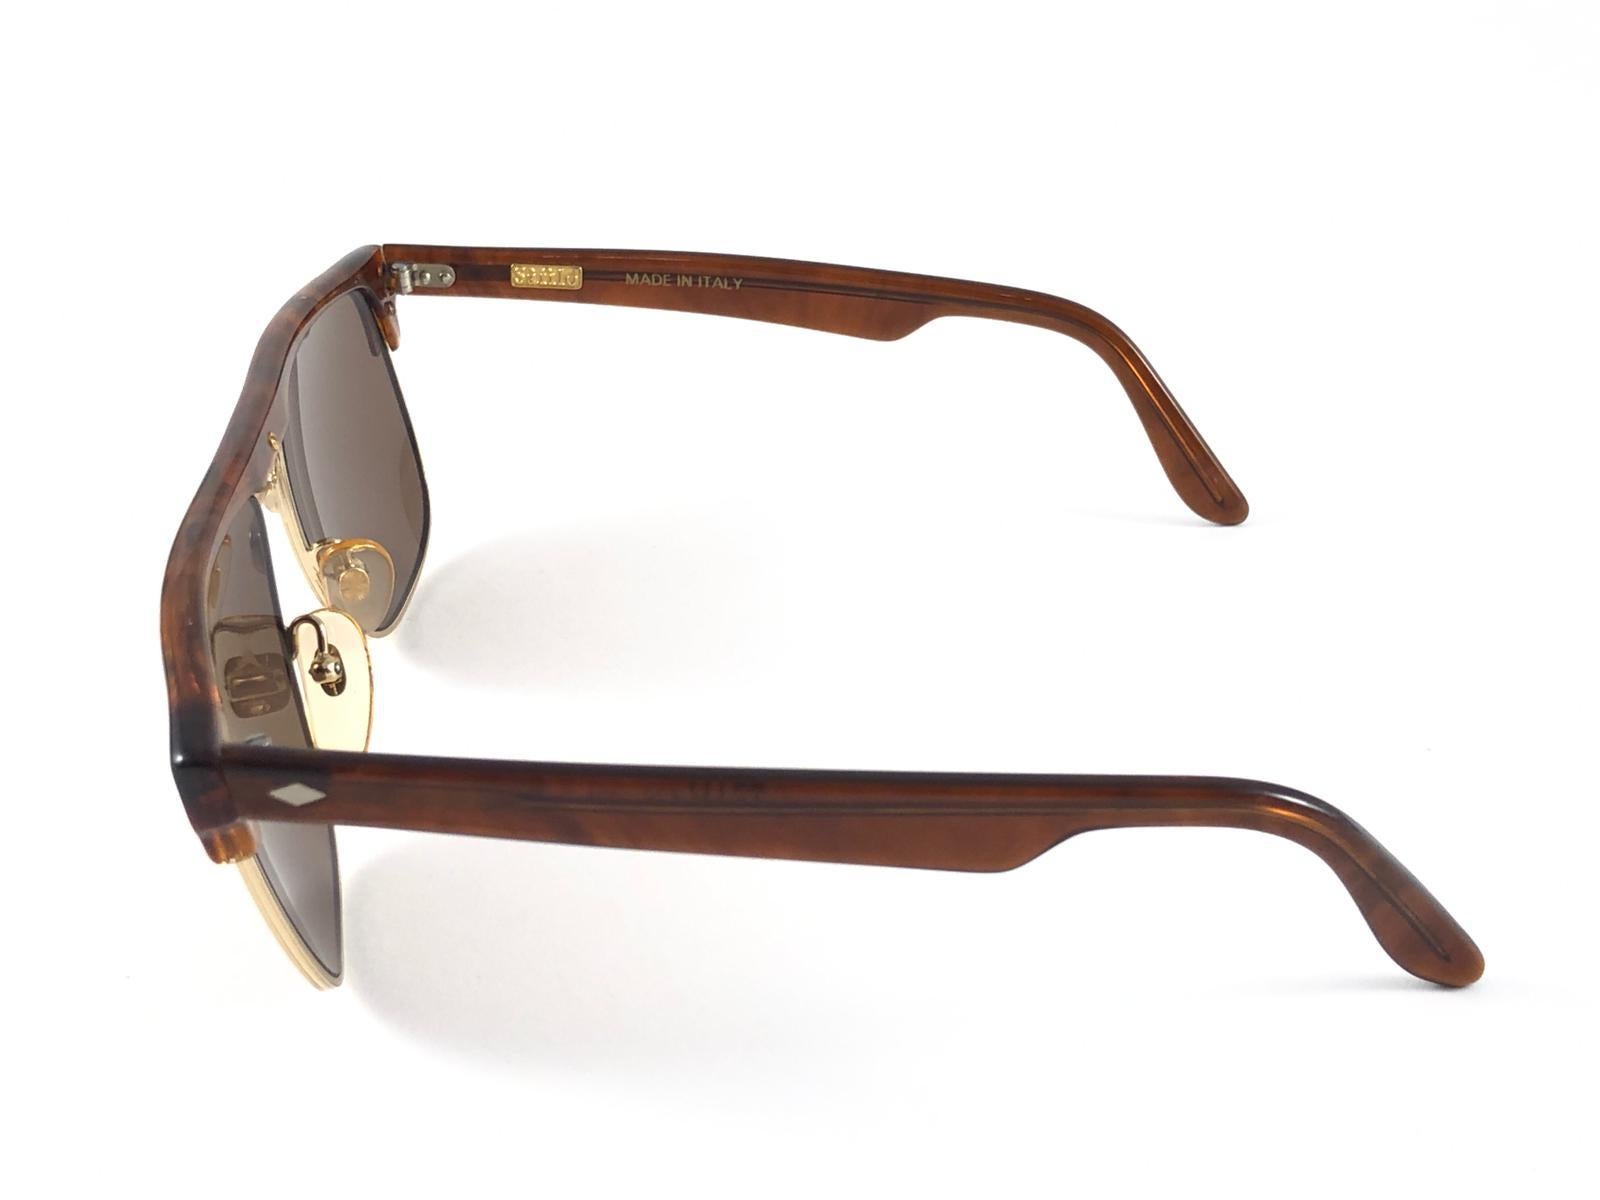 New Vintage Safilo, a balanced combination of Italian craftsmanship, design, functionality and striking aesthetics, this model showcases a Tortoise and Gold frame holding medium Brown lenses

New, never worn or displayed.
Made in